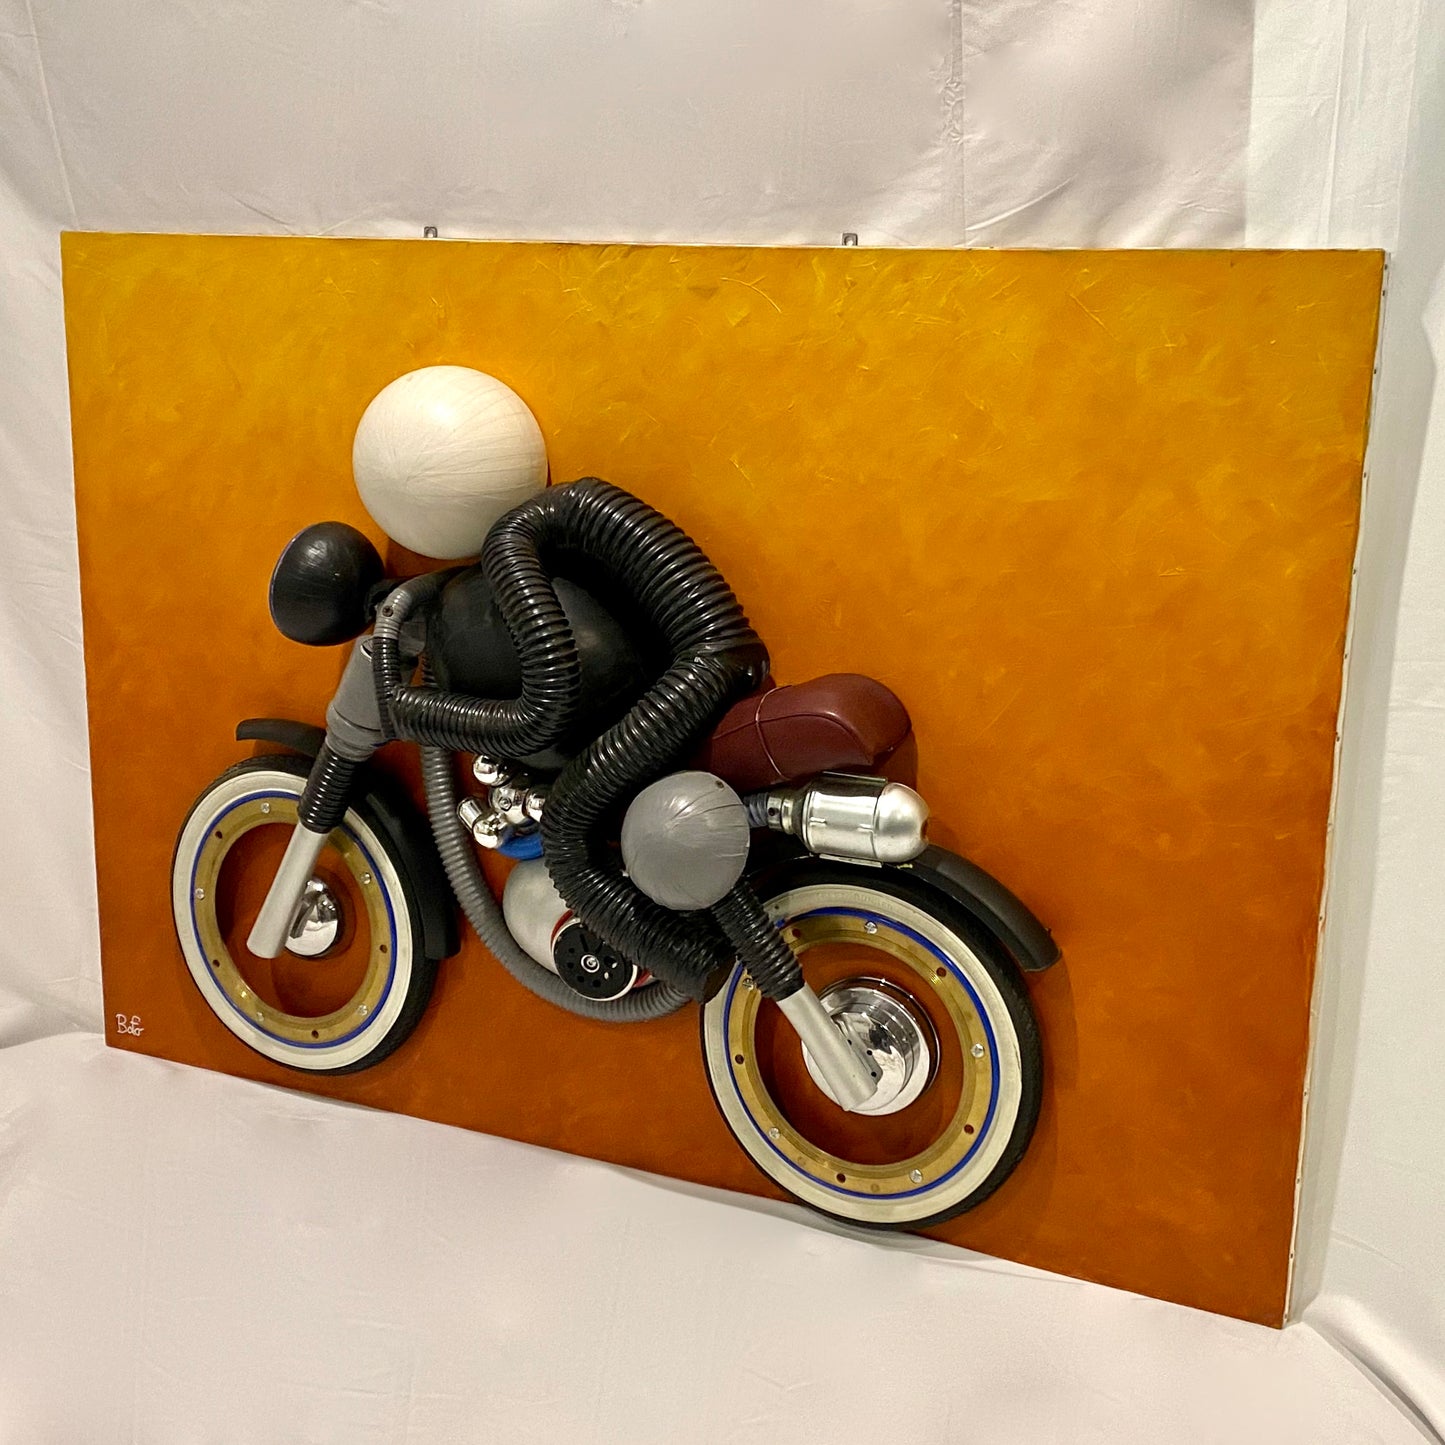 Contemporary Italian Found Objects Recycled Art Sculpture of a Biker Signed Bafo